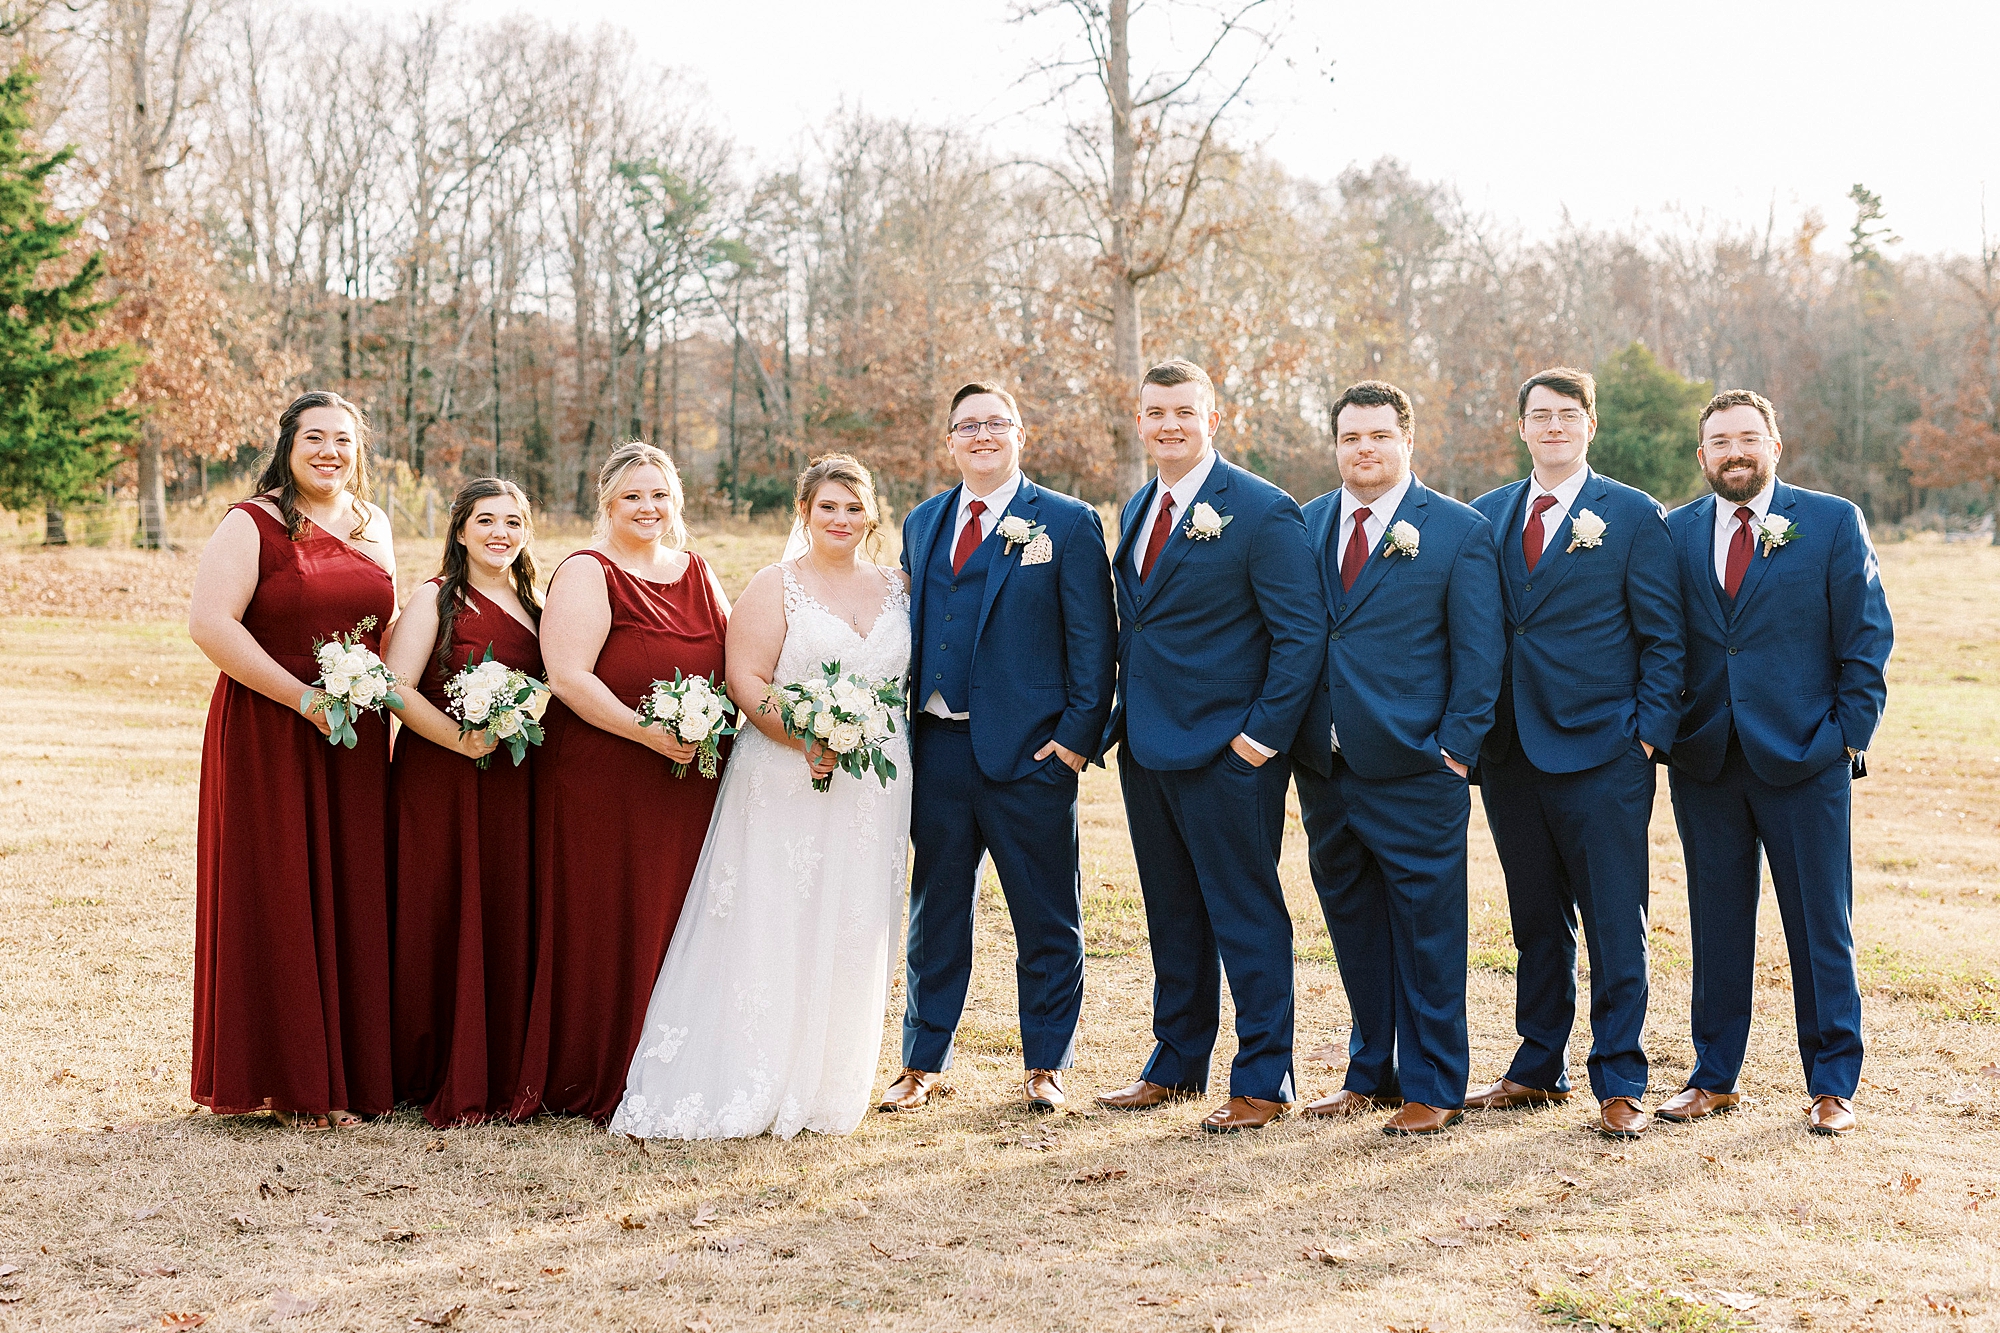 bride and groom pose with bridesmaids in red gowns and groomsmen in blue suits for fall wedding day